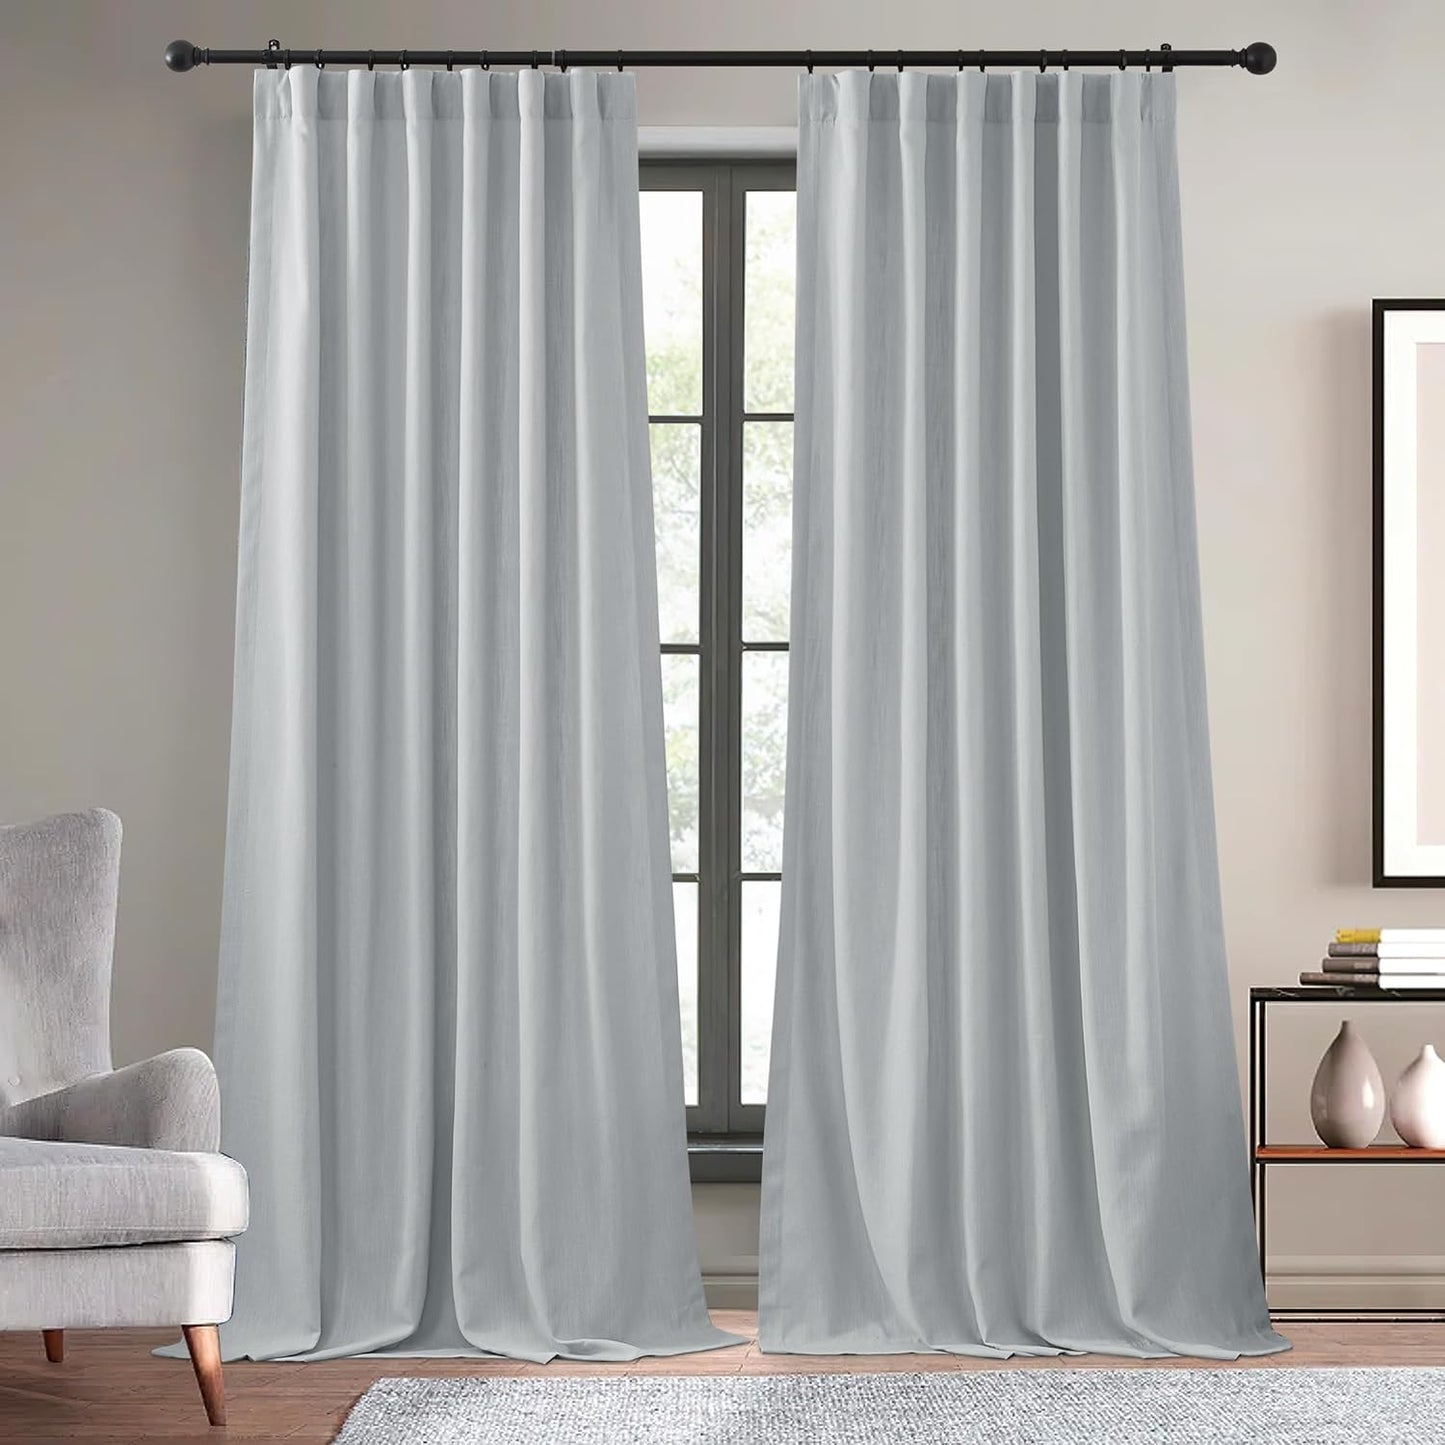 KGORGE Thick Faux Linen Weave Textured Curtains for Bedroom Light Filtering Semi Sheer Curtains Farmhouse Decor Pinch Pleated Window Drapes for Living Room, Linen, W 52" X L 96", 2 Pcs  KGORGE Sliver Grey W 52 X L 96 | Pair 